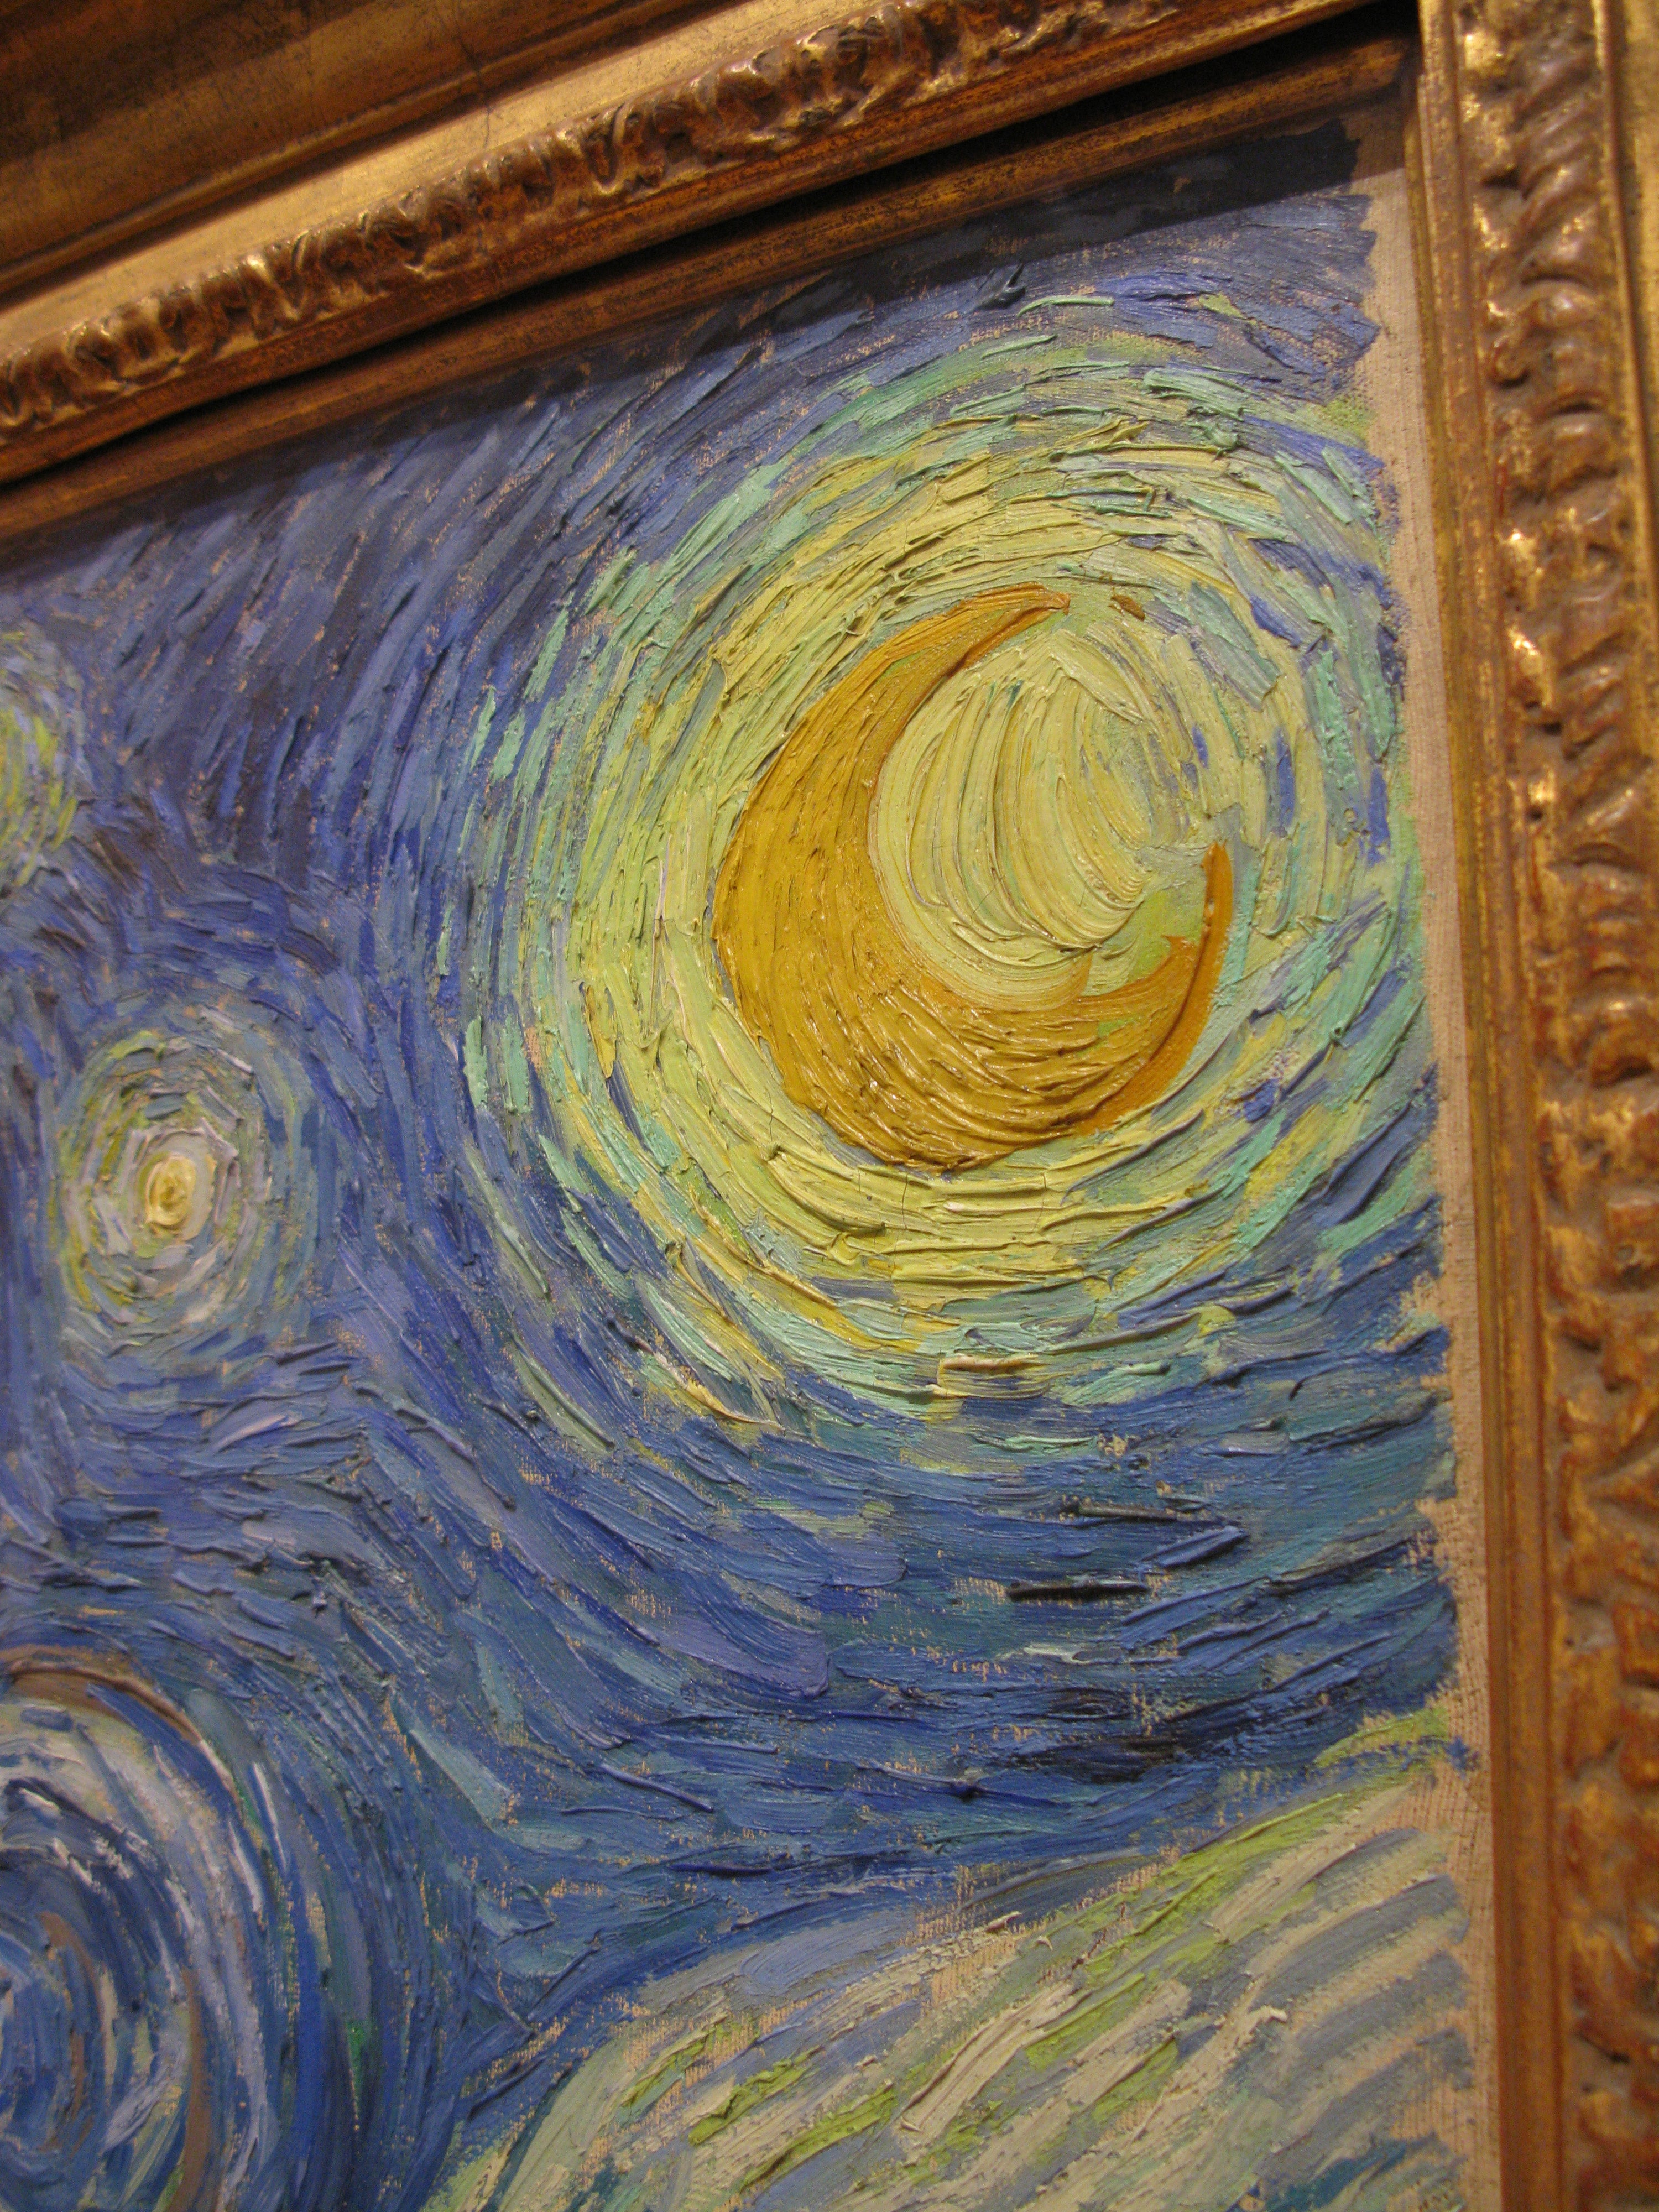 TEXTURED PAINTINGS BY VAN GOGH AND JACKSON POLLACK